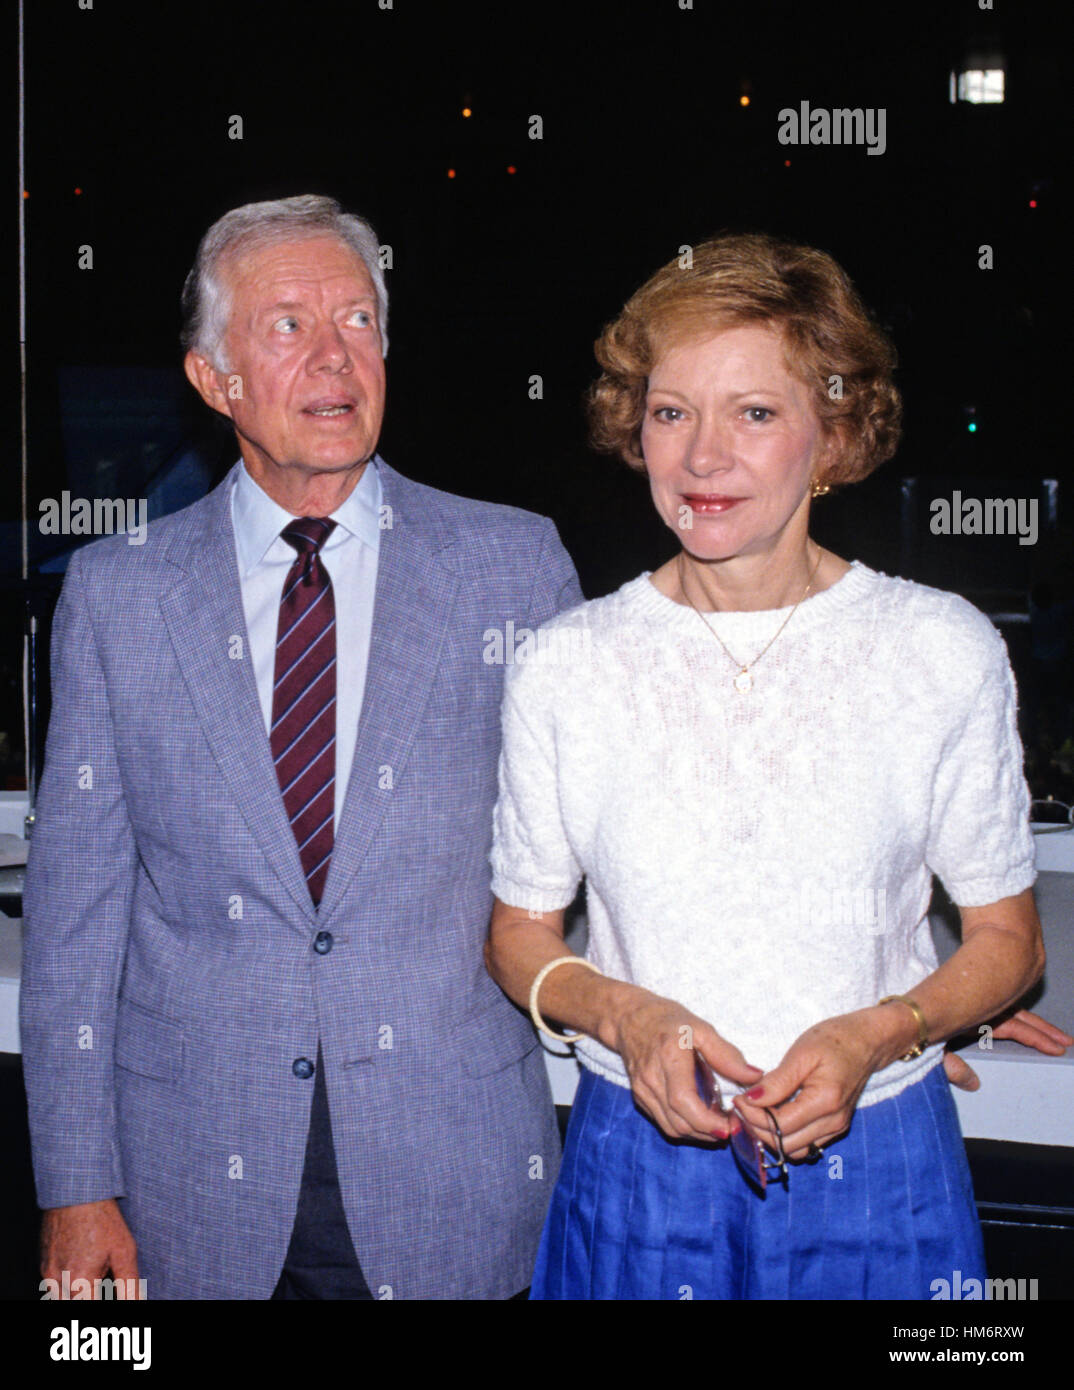 Former United States President Jimmy Carter, accompanied by his wife, former first lady Rosalynn Carter, visits the Omni Coliseum in Atlanta, Georgia prior to his addressing the 1988 Democratic National Convention on July 18, 1988. Stock Photo